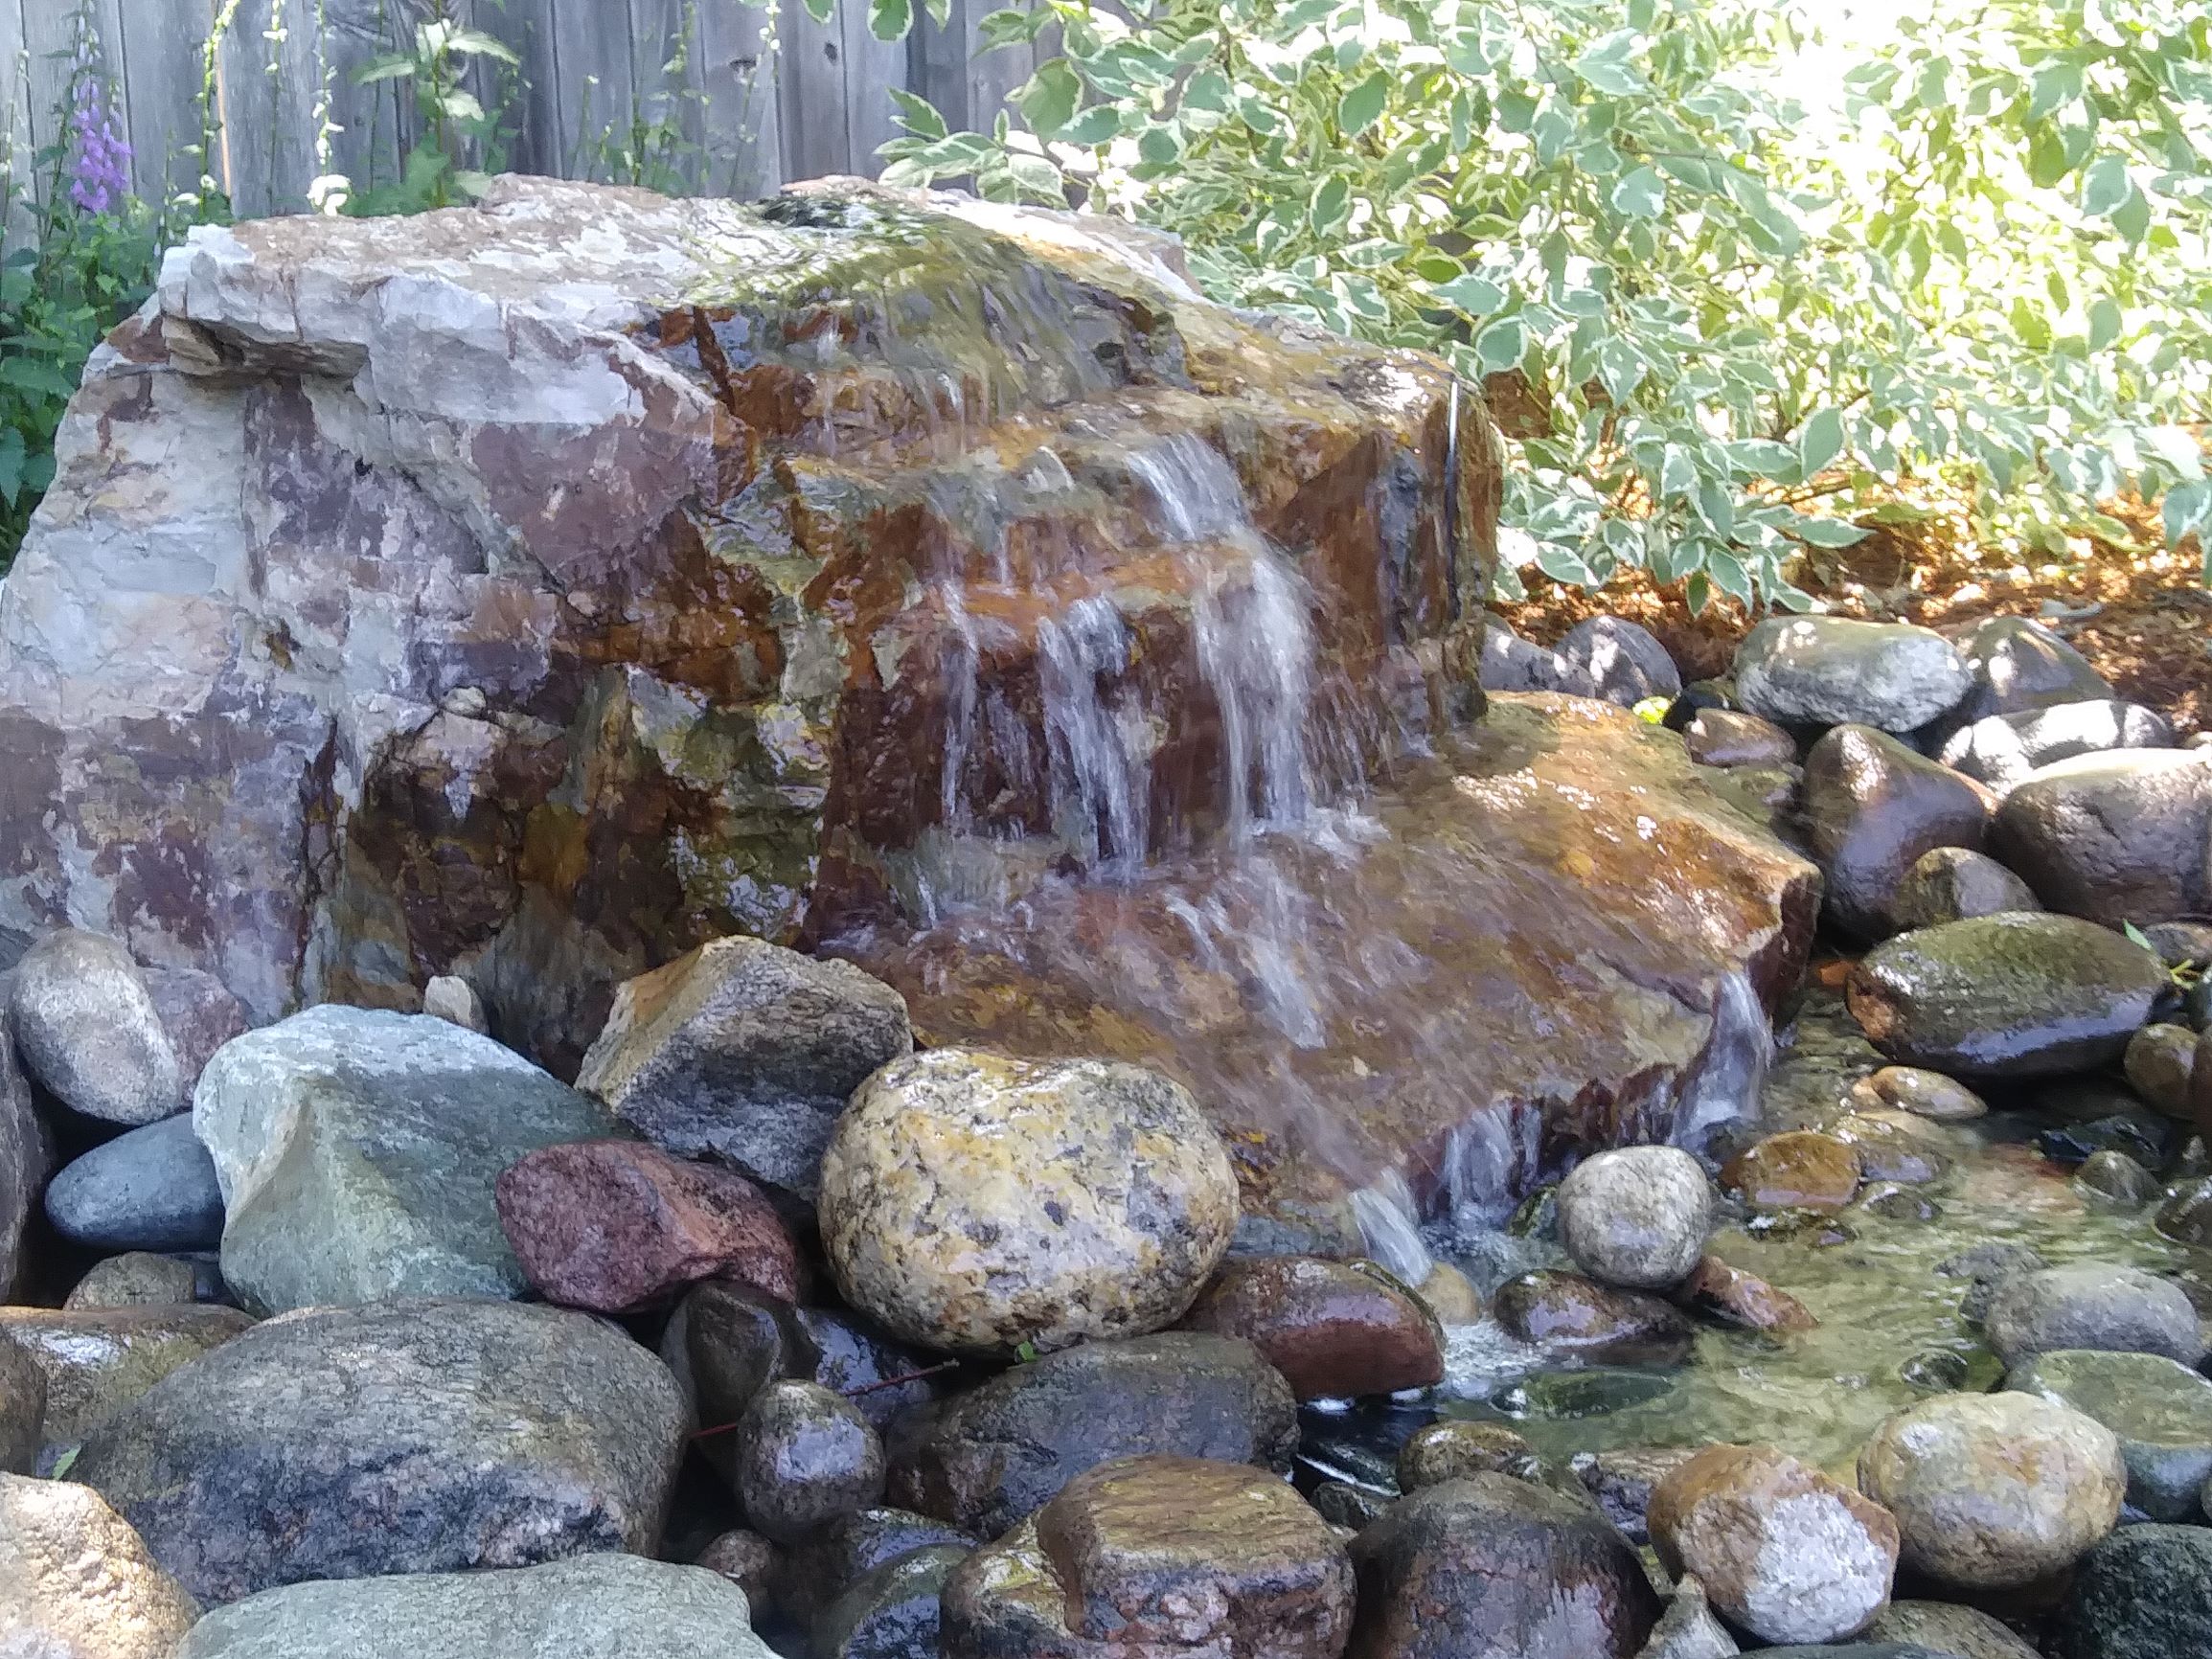 Large rock water feature surrounded by bushes.